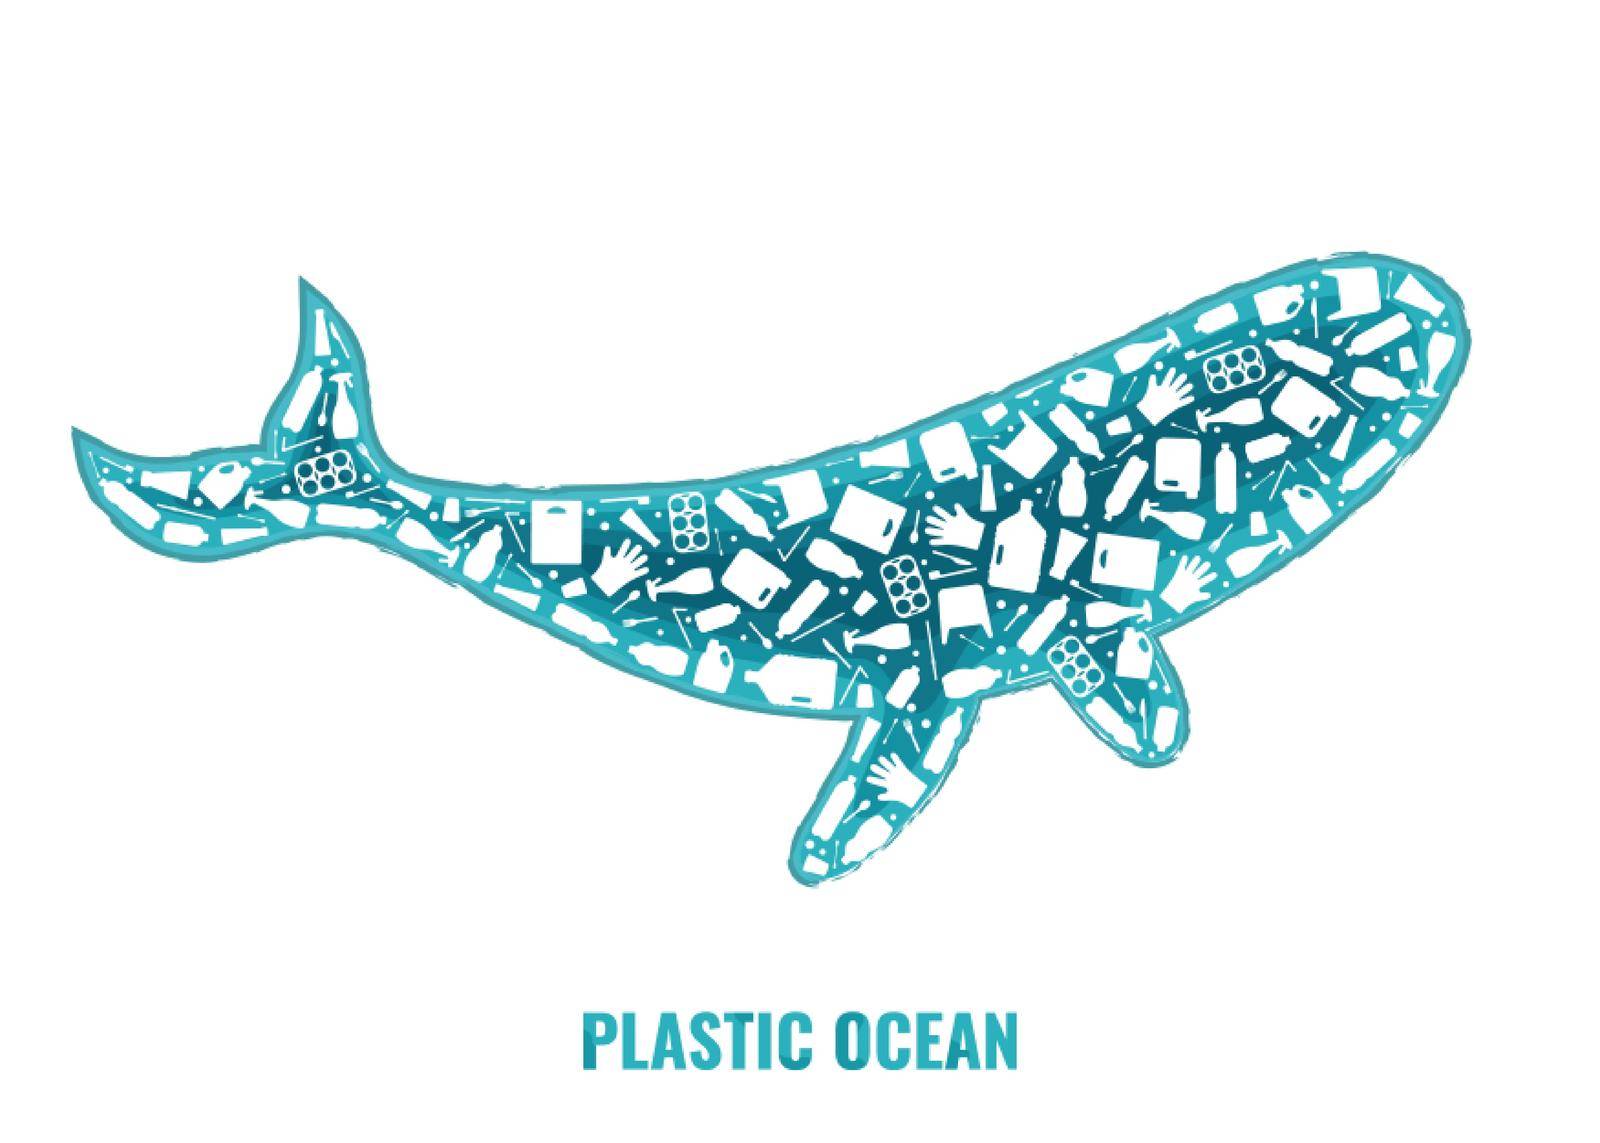 Whale plastic waste ocean environment problem by moonnoon